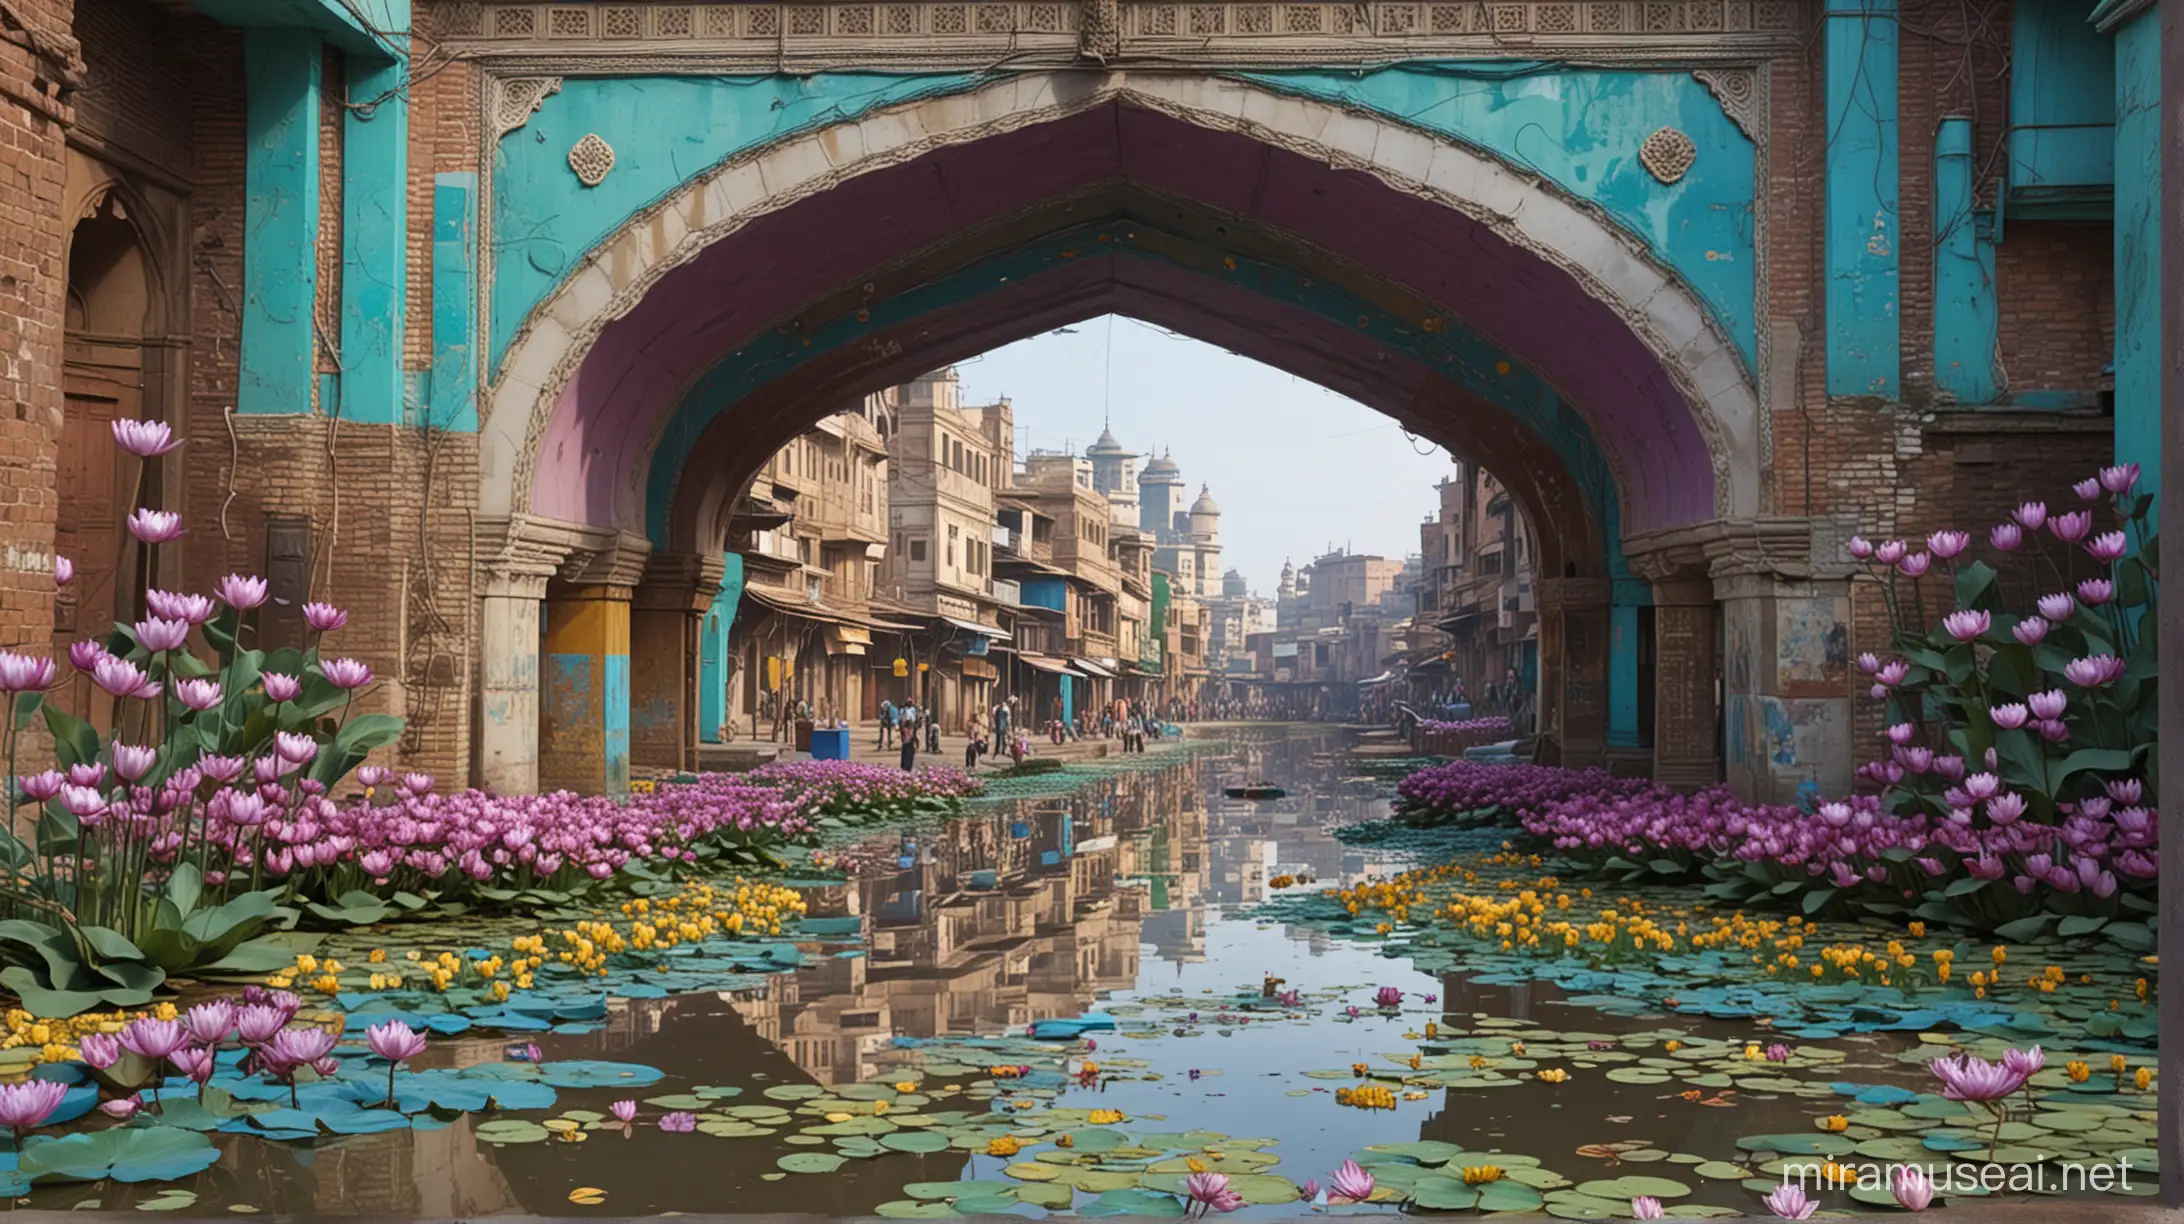 futurist scenario, psy-electronic phantasy, science fiction, future time, signs of decay, populated with indian and african half humans, half robots, psy-electronic,colorfully abundant, lotus and african pattern, several layers, all colours, turquoise, purple, green, white, yellow, hip hop style, benares court and river ghats, mughal scenario and arches, water lilies, colorful, psychedelic, hyperrealistic, pastel colors on walls wearing off very strong, background blurred